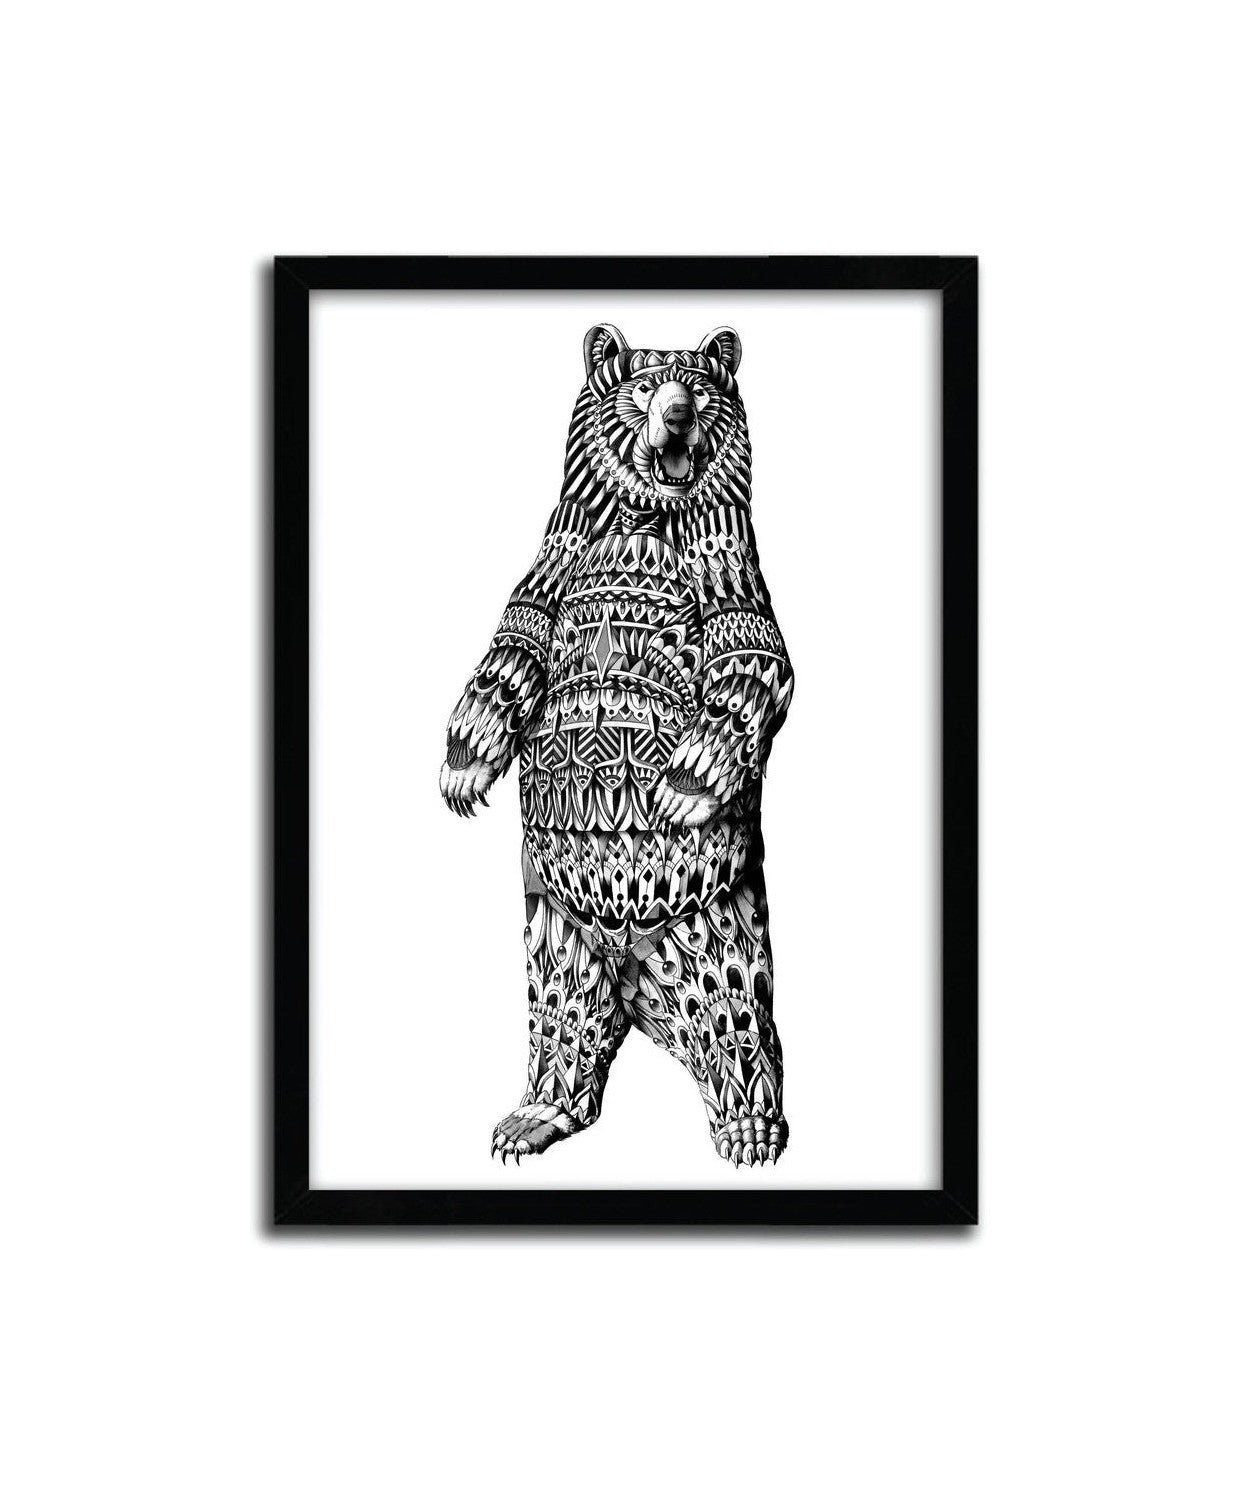 Affiche ORNATE GRIZZLY BEAR BY BIOWORKZ